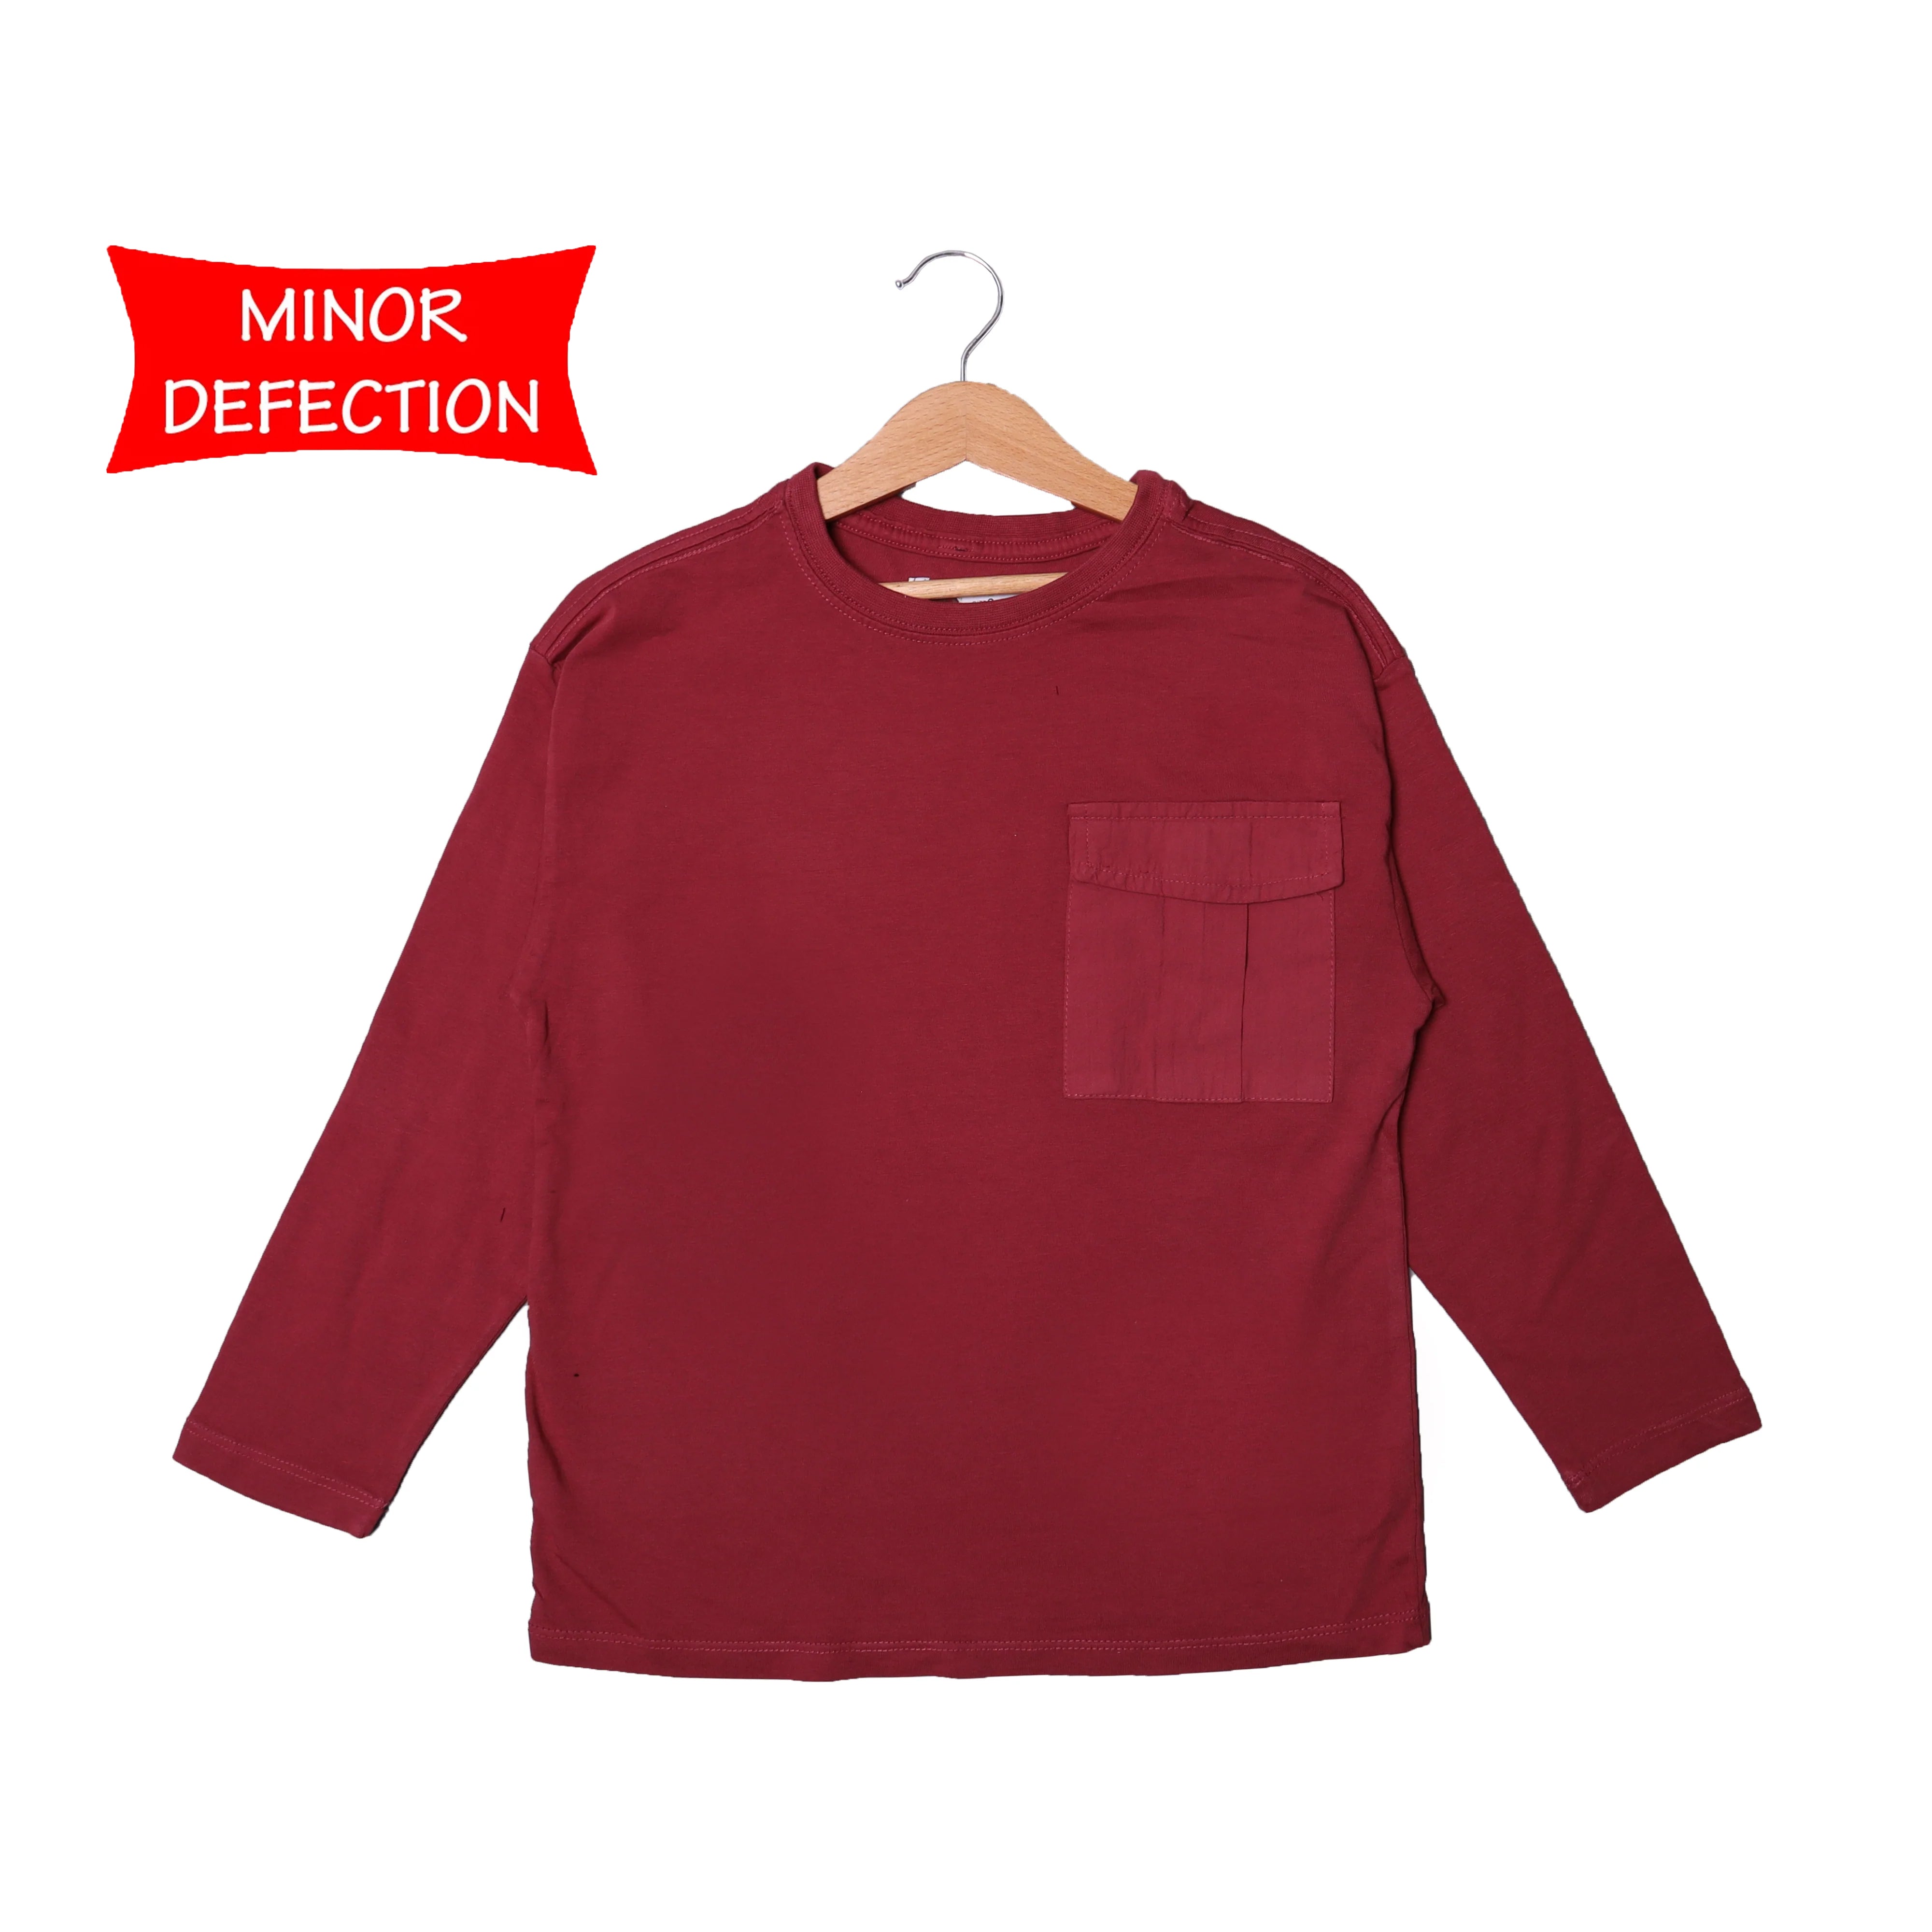 MINOR DEFECTION MAROON PLAIN WITH POCKET FULL SLEEVES T-SHIRT